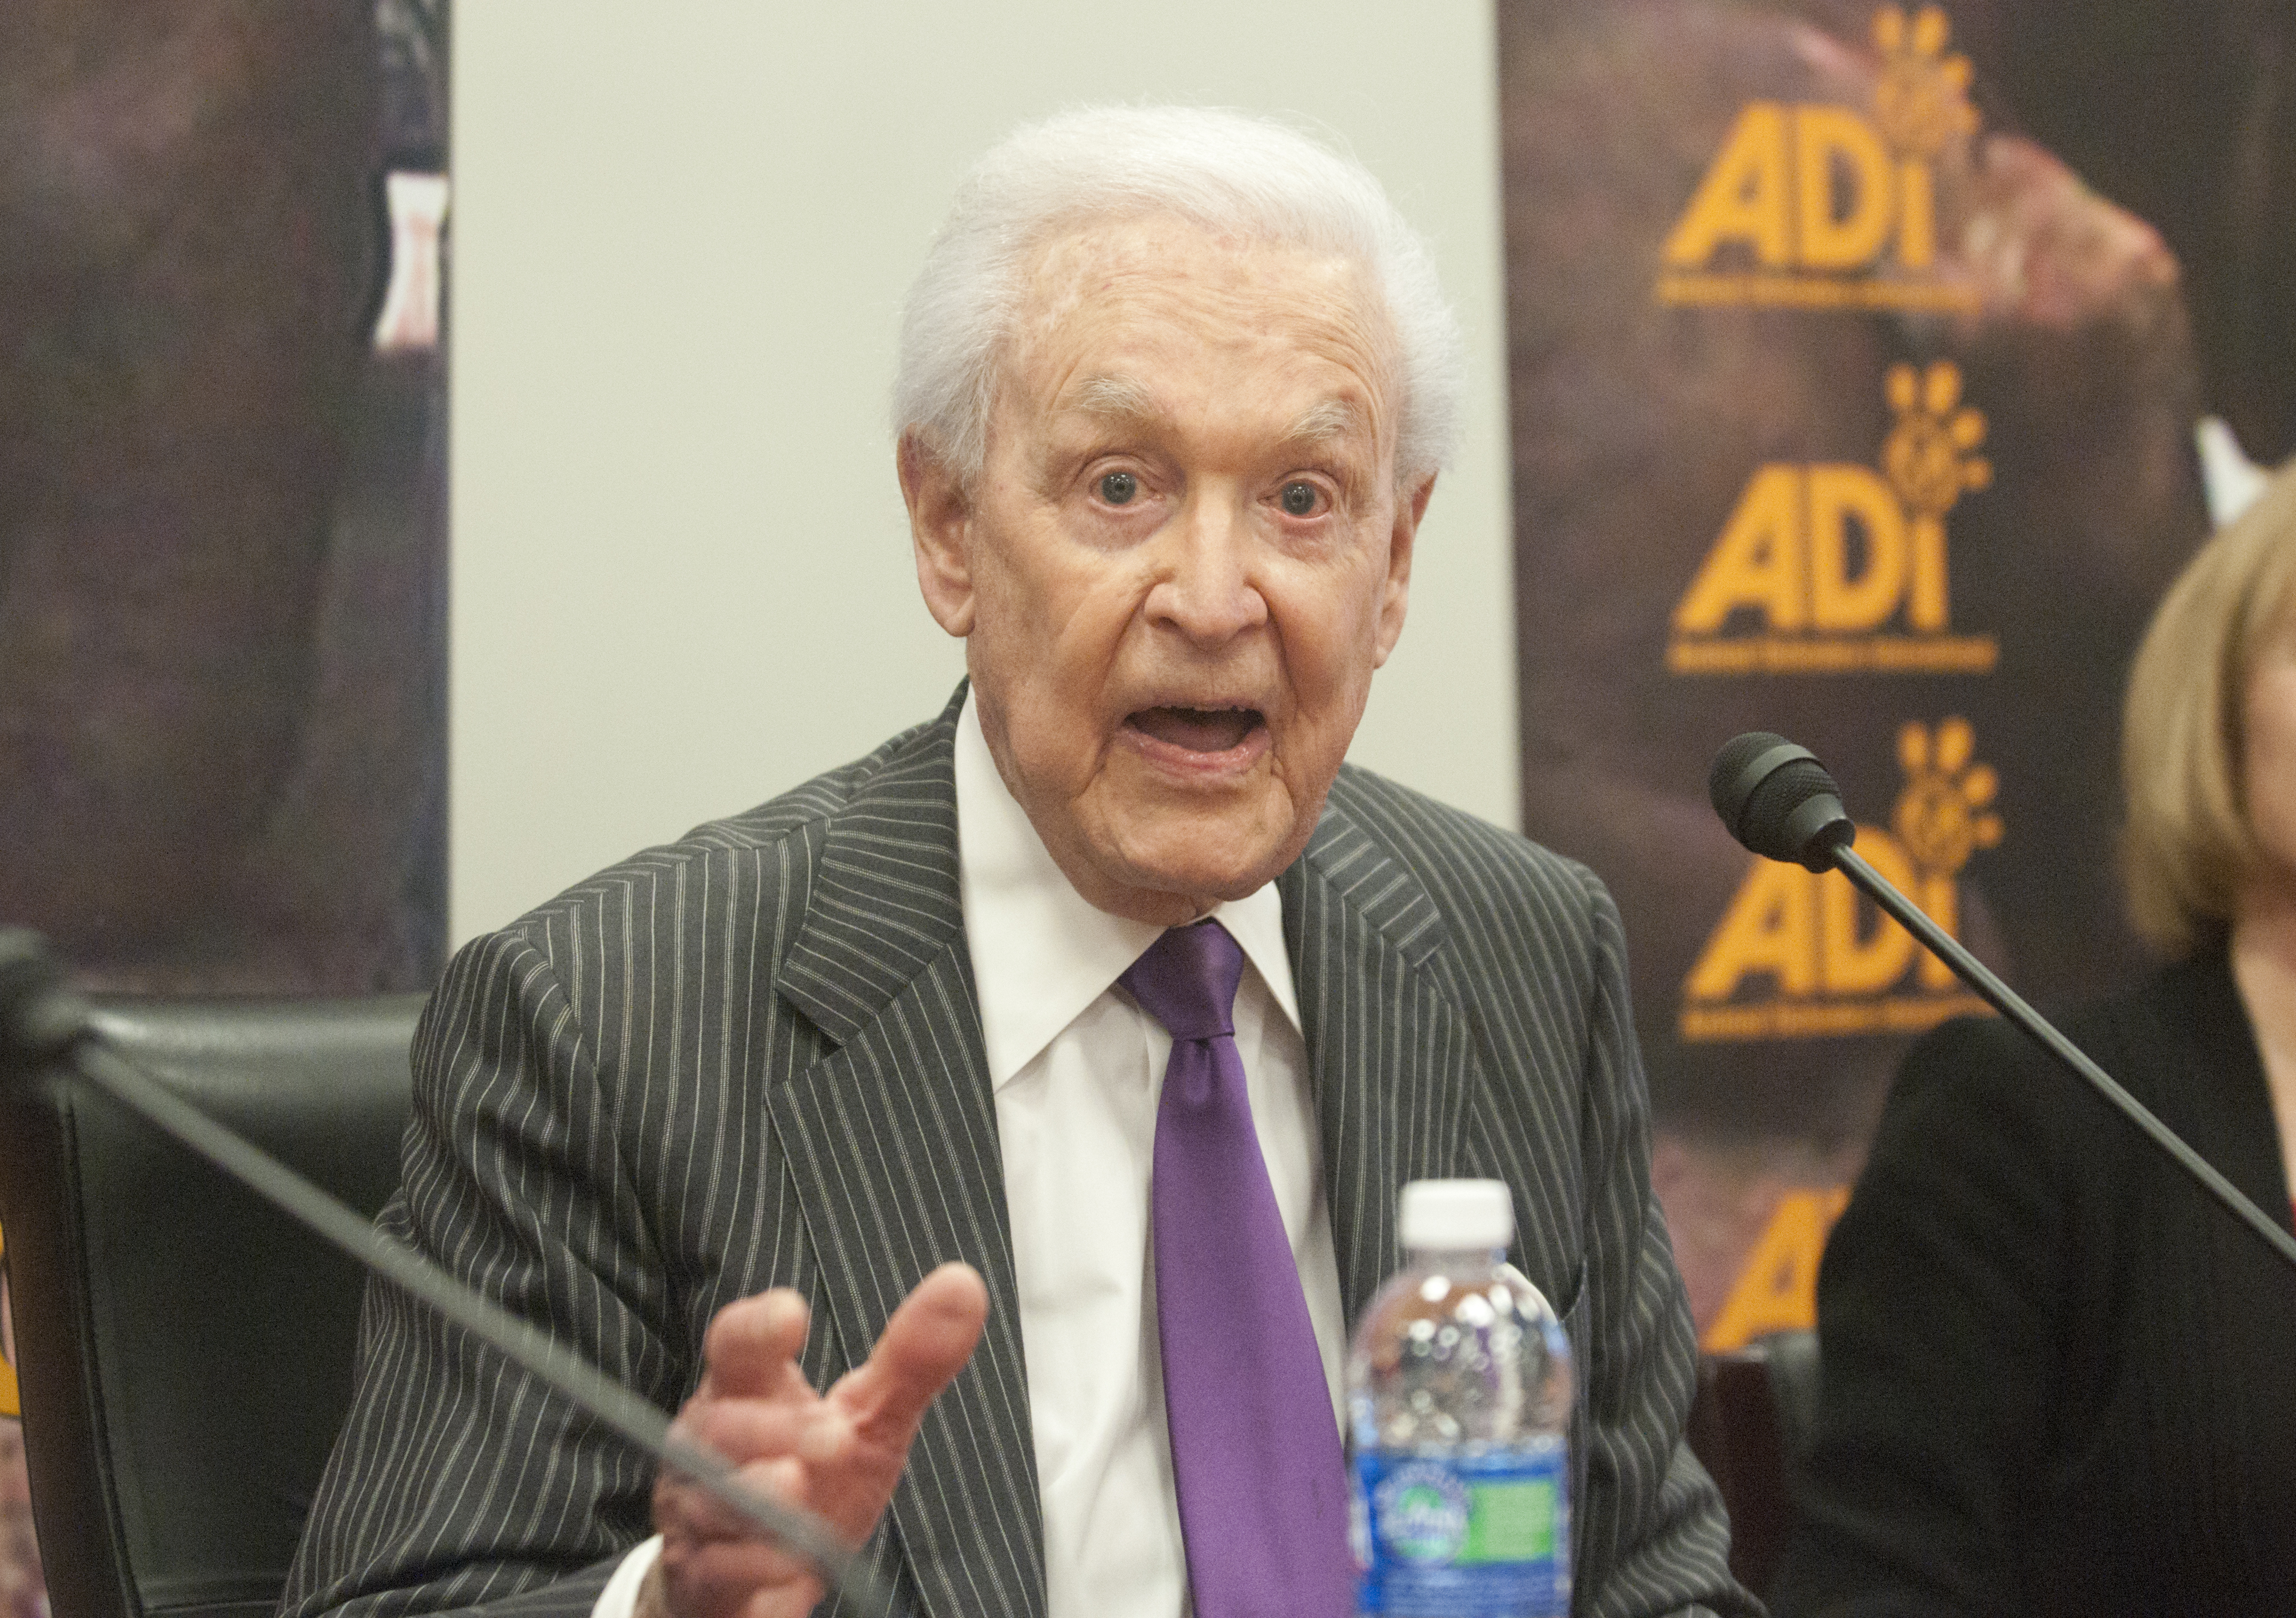 Bob Barker speaking at a news conference discussing the launch of a congressional initiative regarding the use of animals in the entertainment industry in Washington, 2011 | Source: Getty Images